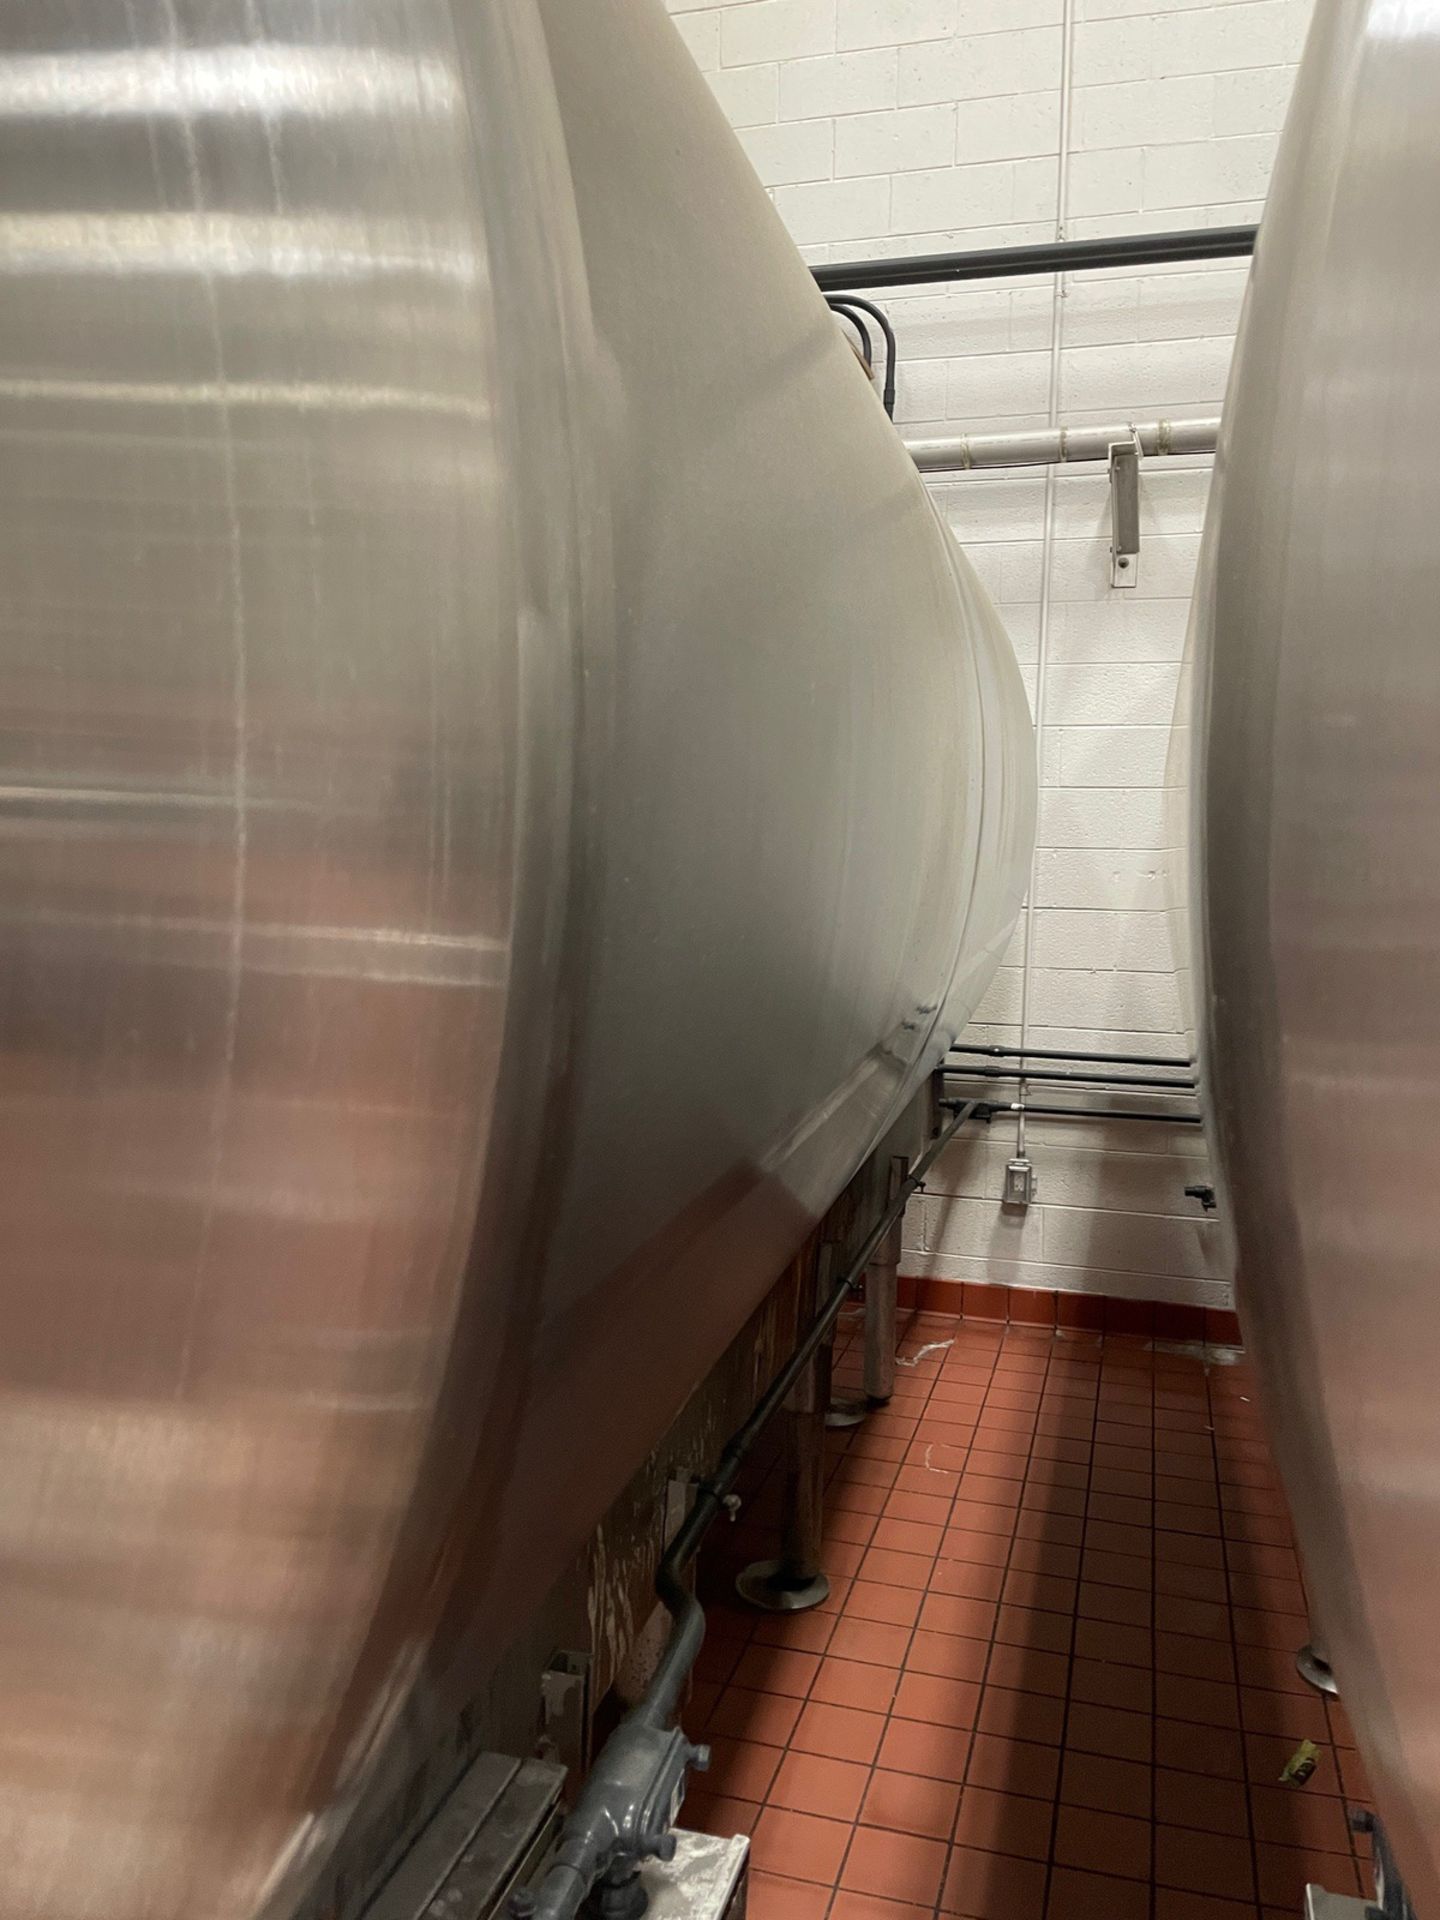 Creamery Package 5,300 Gallon Stainless Steel Horizontal Tank, Vertical Agitation, | Rig Fee: $2000 - Image 4 of 9